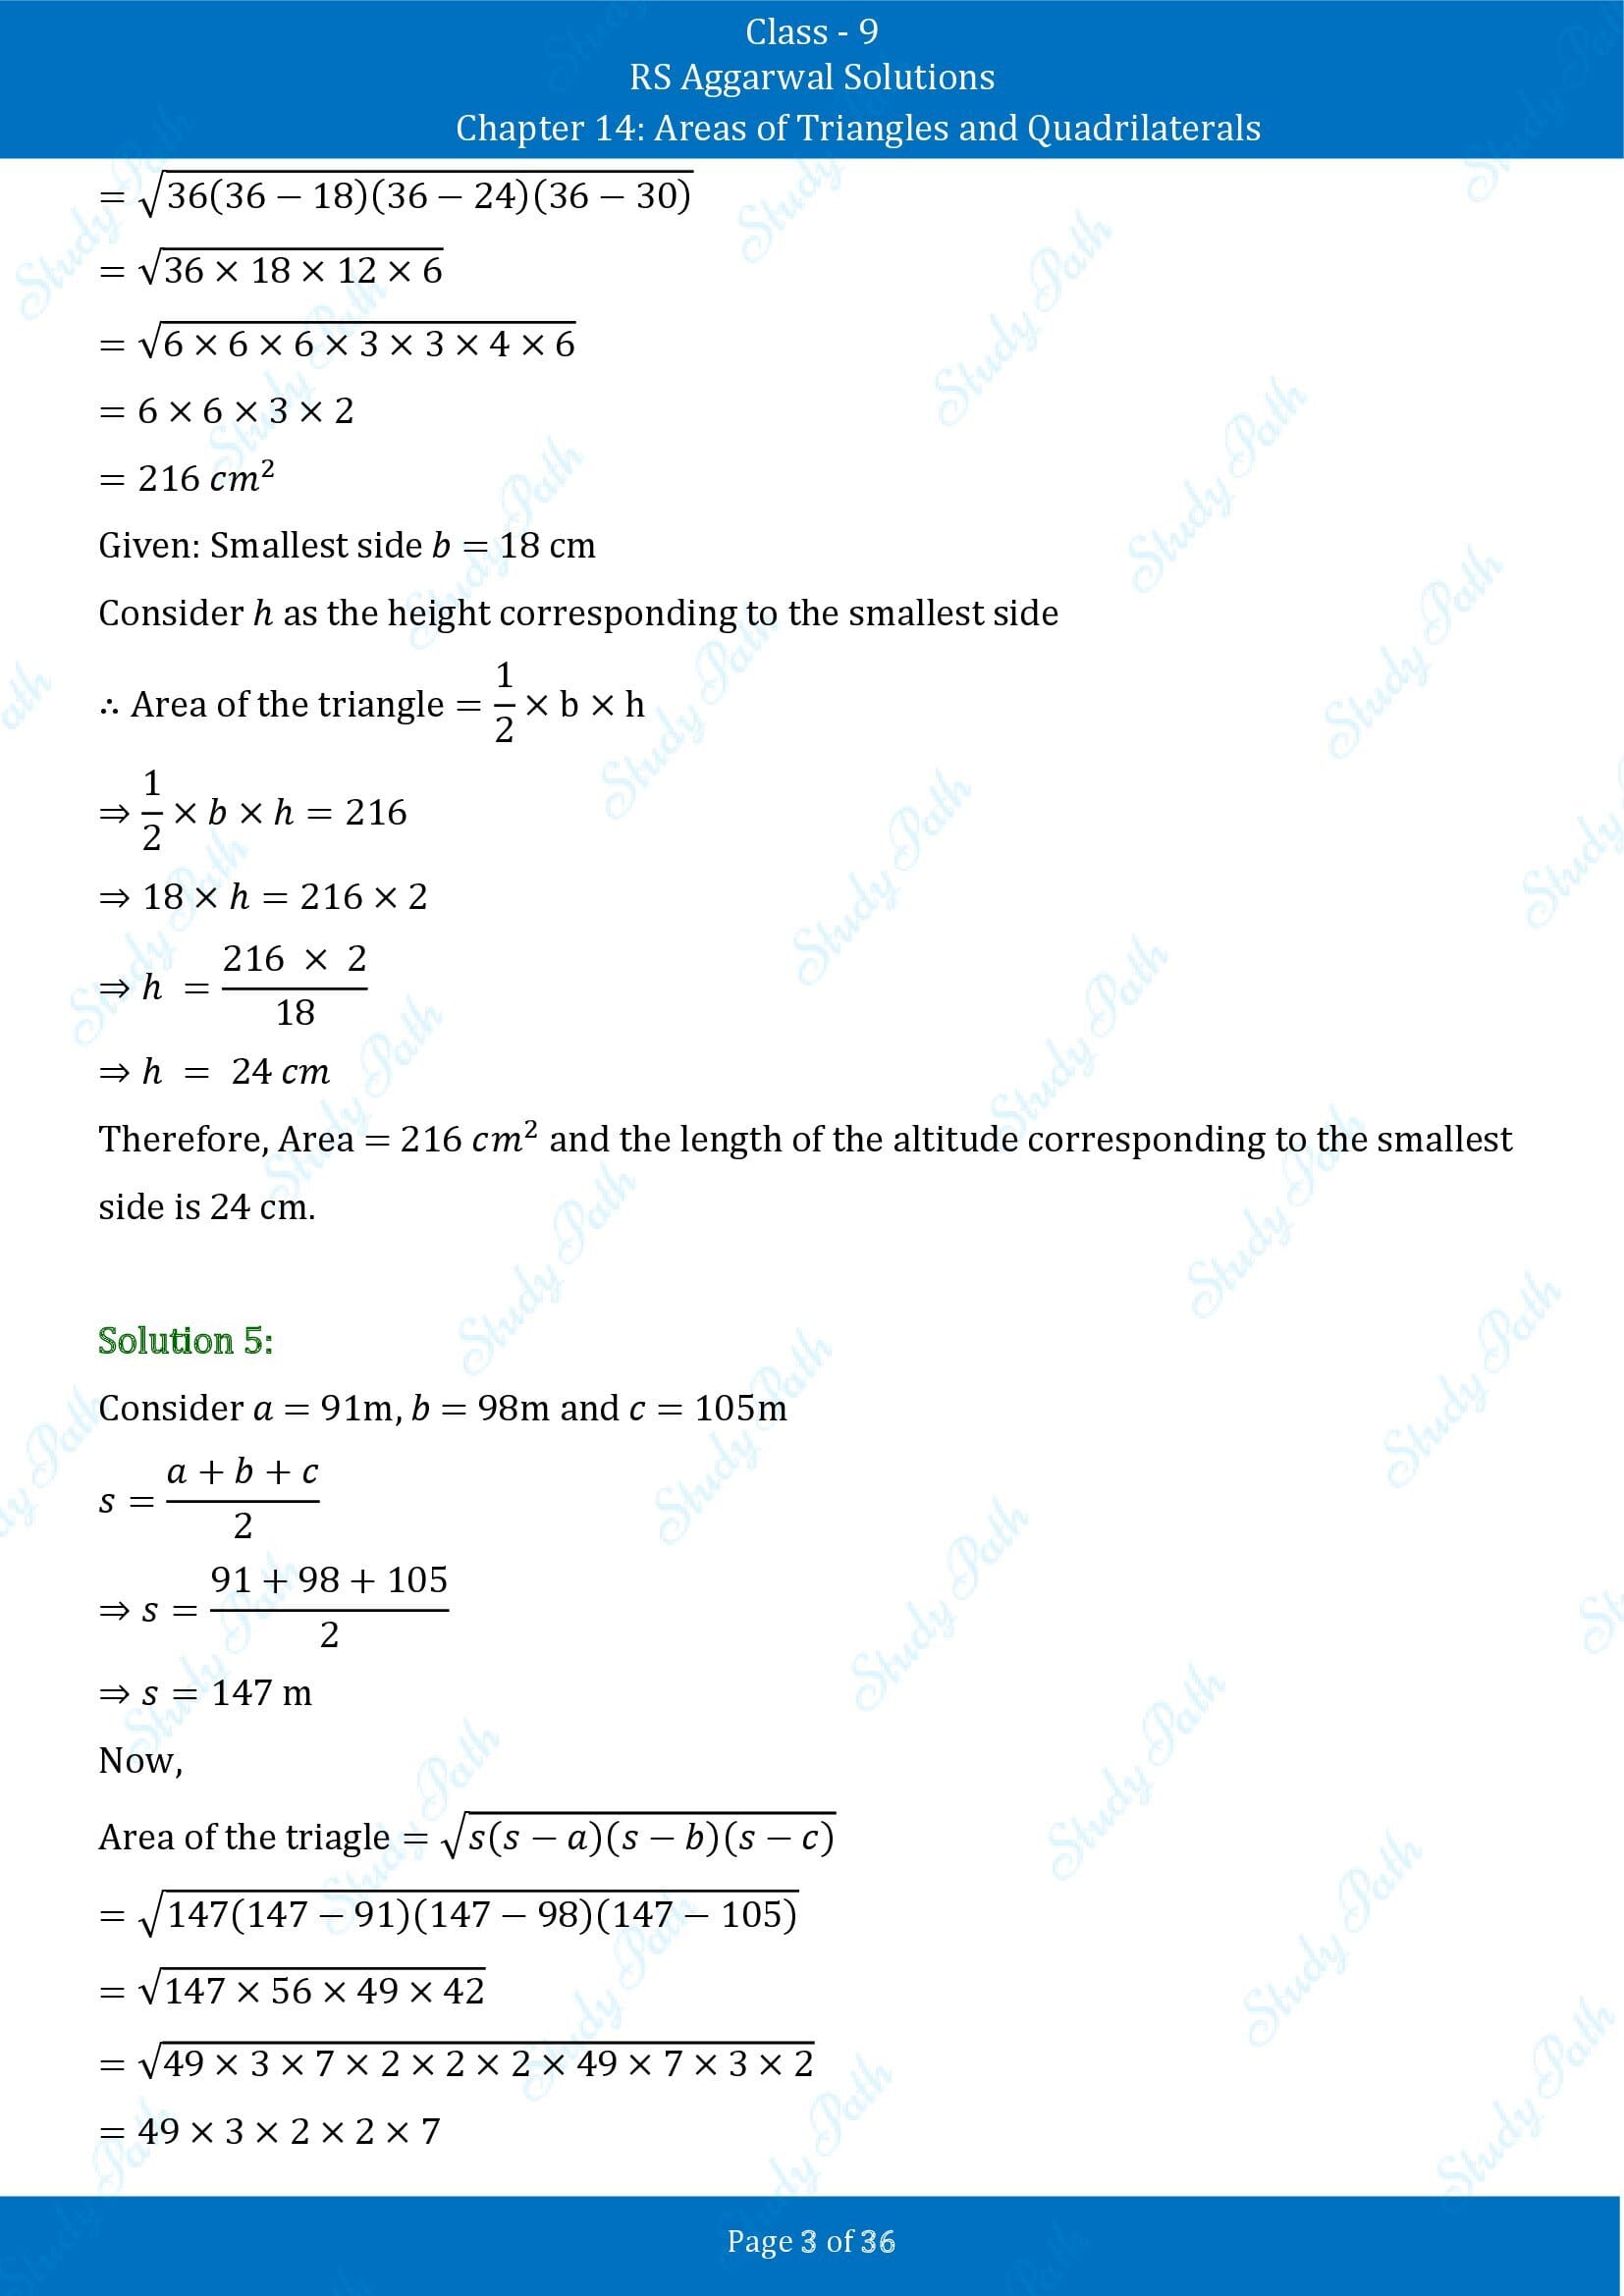 RS Aggarwal Solutions Class 9 Chapter 14 Areas of Triangles and Quadrilaterals Exercise 14 00003